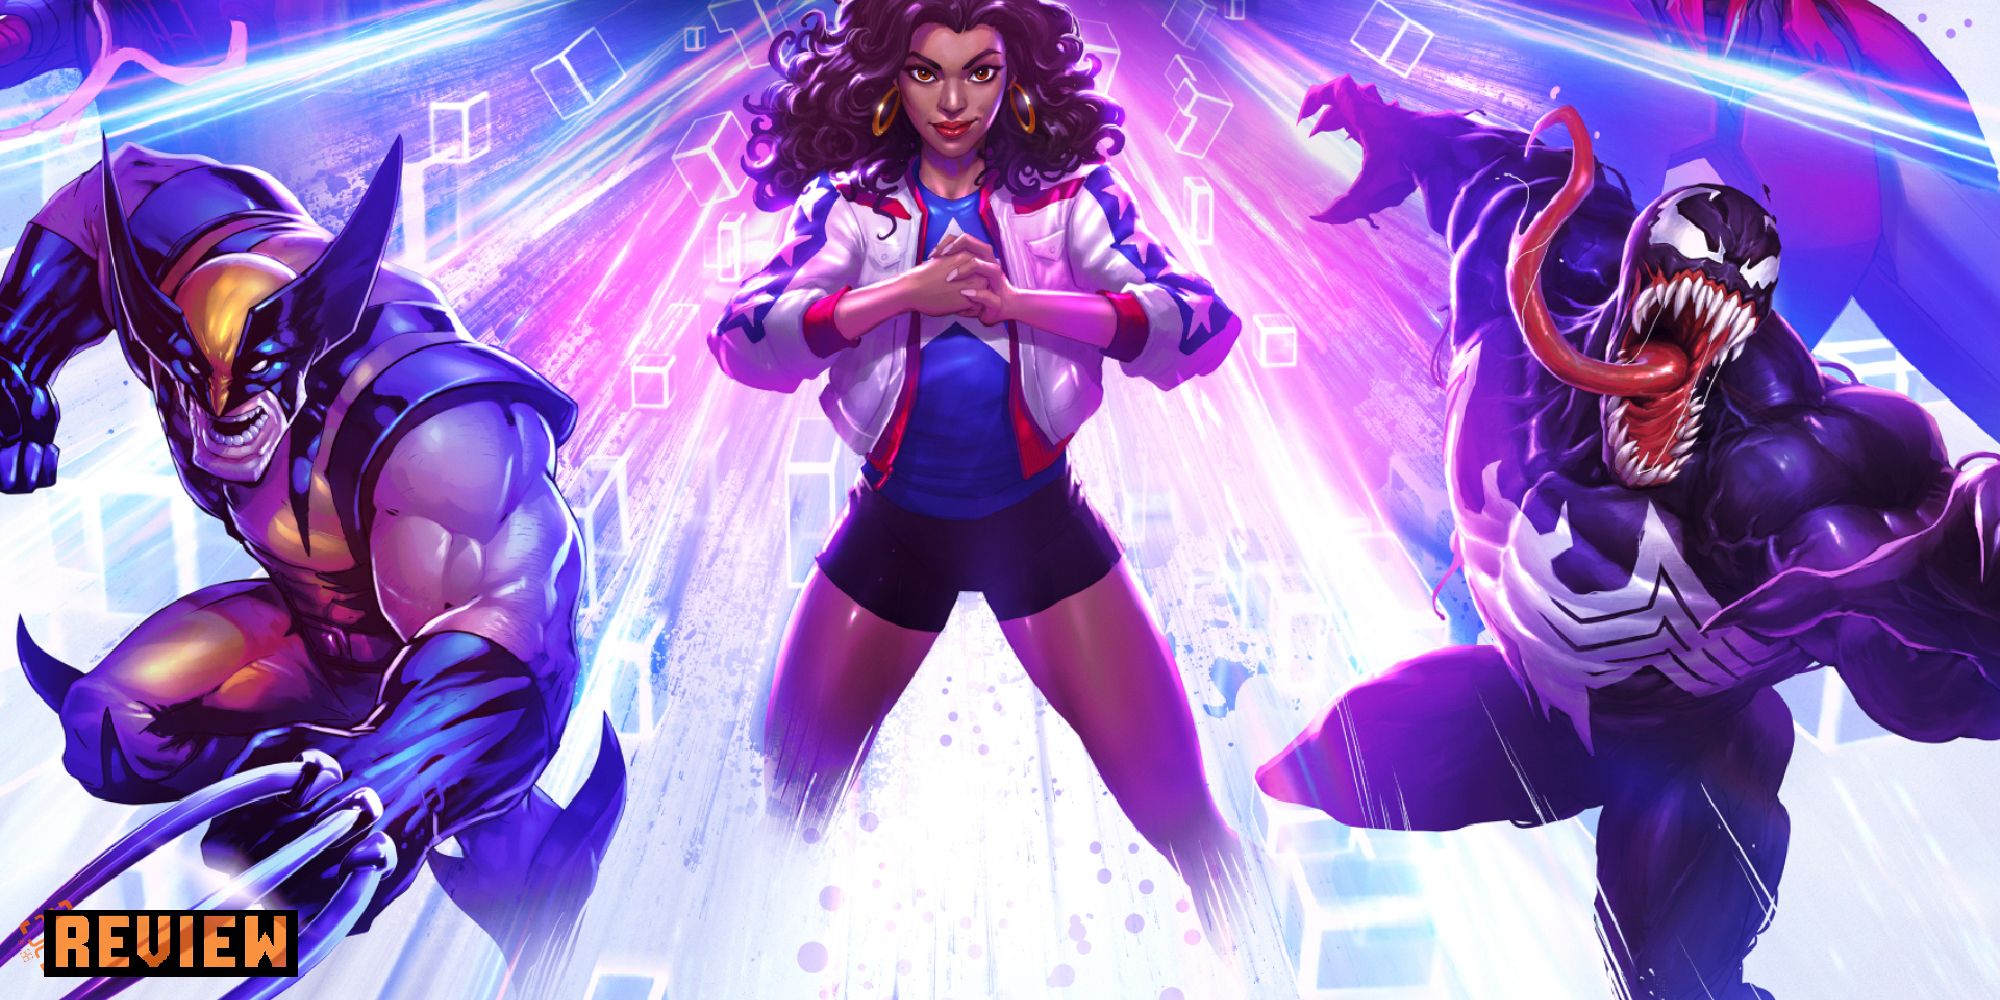 Hearthstone' designer announces new collectible card game 'Marvel Snap